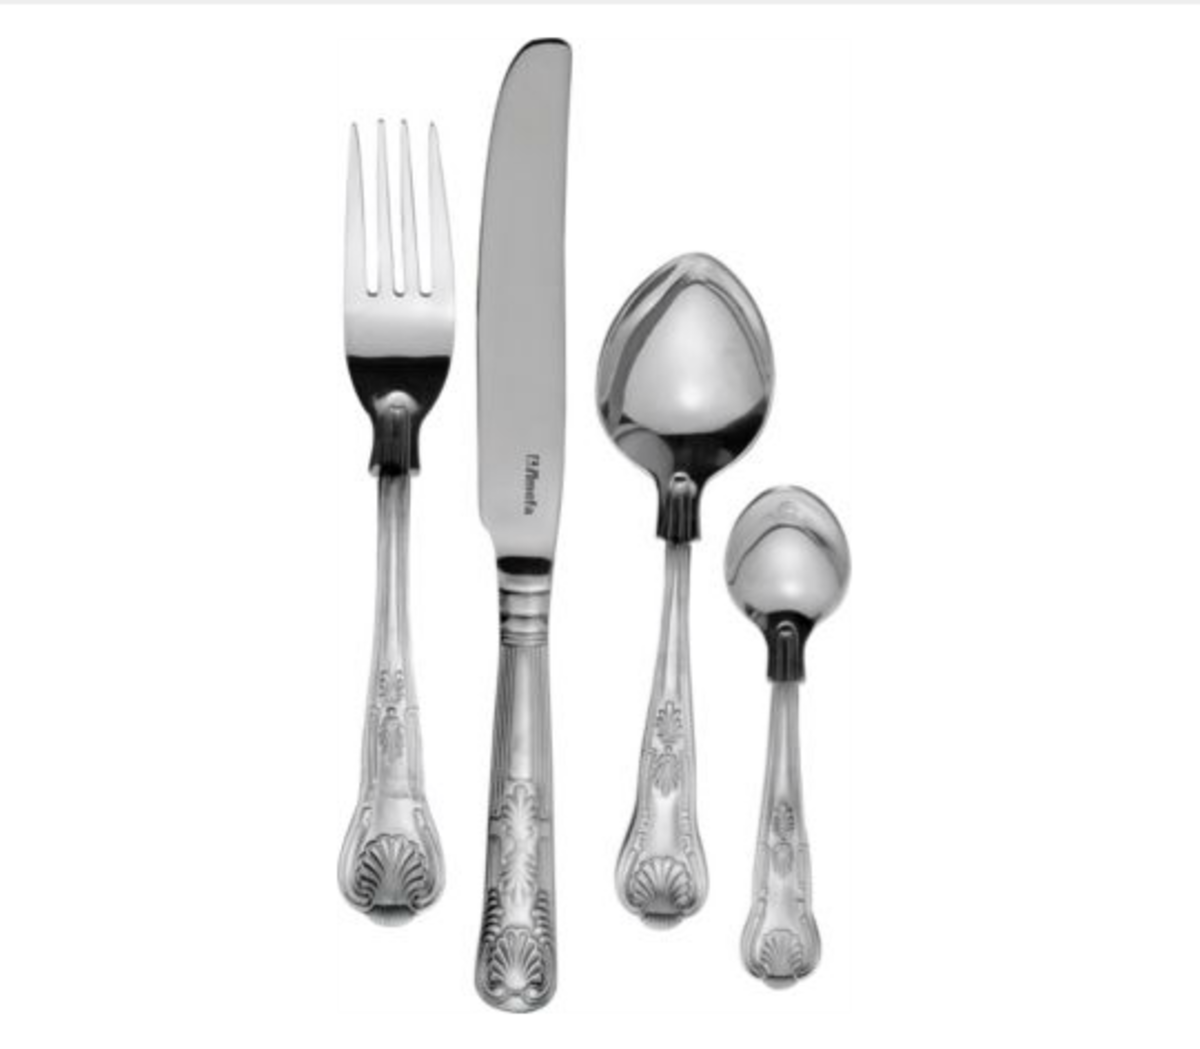 Types of Cutlery: 18/10 and 18/0, Brands, Shapes and Sizes